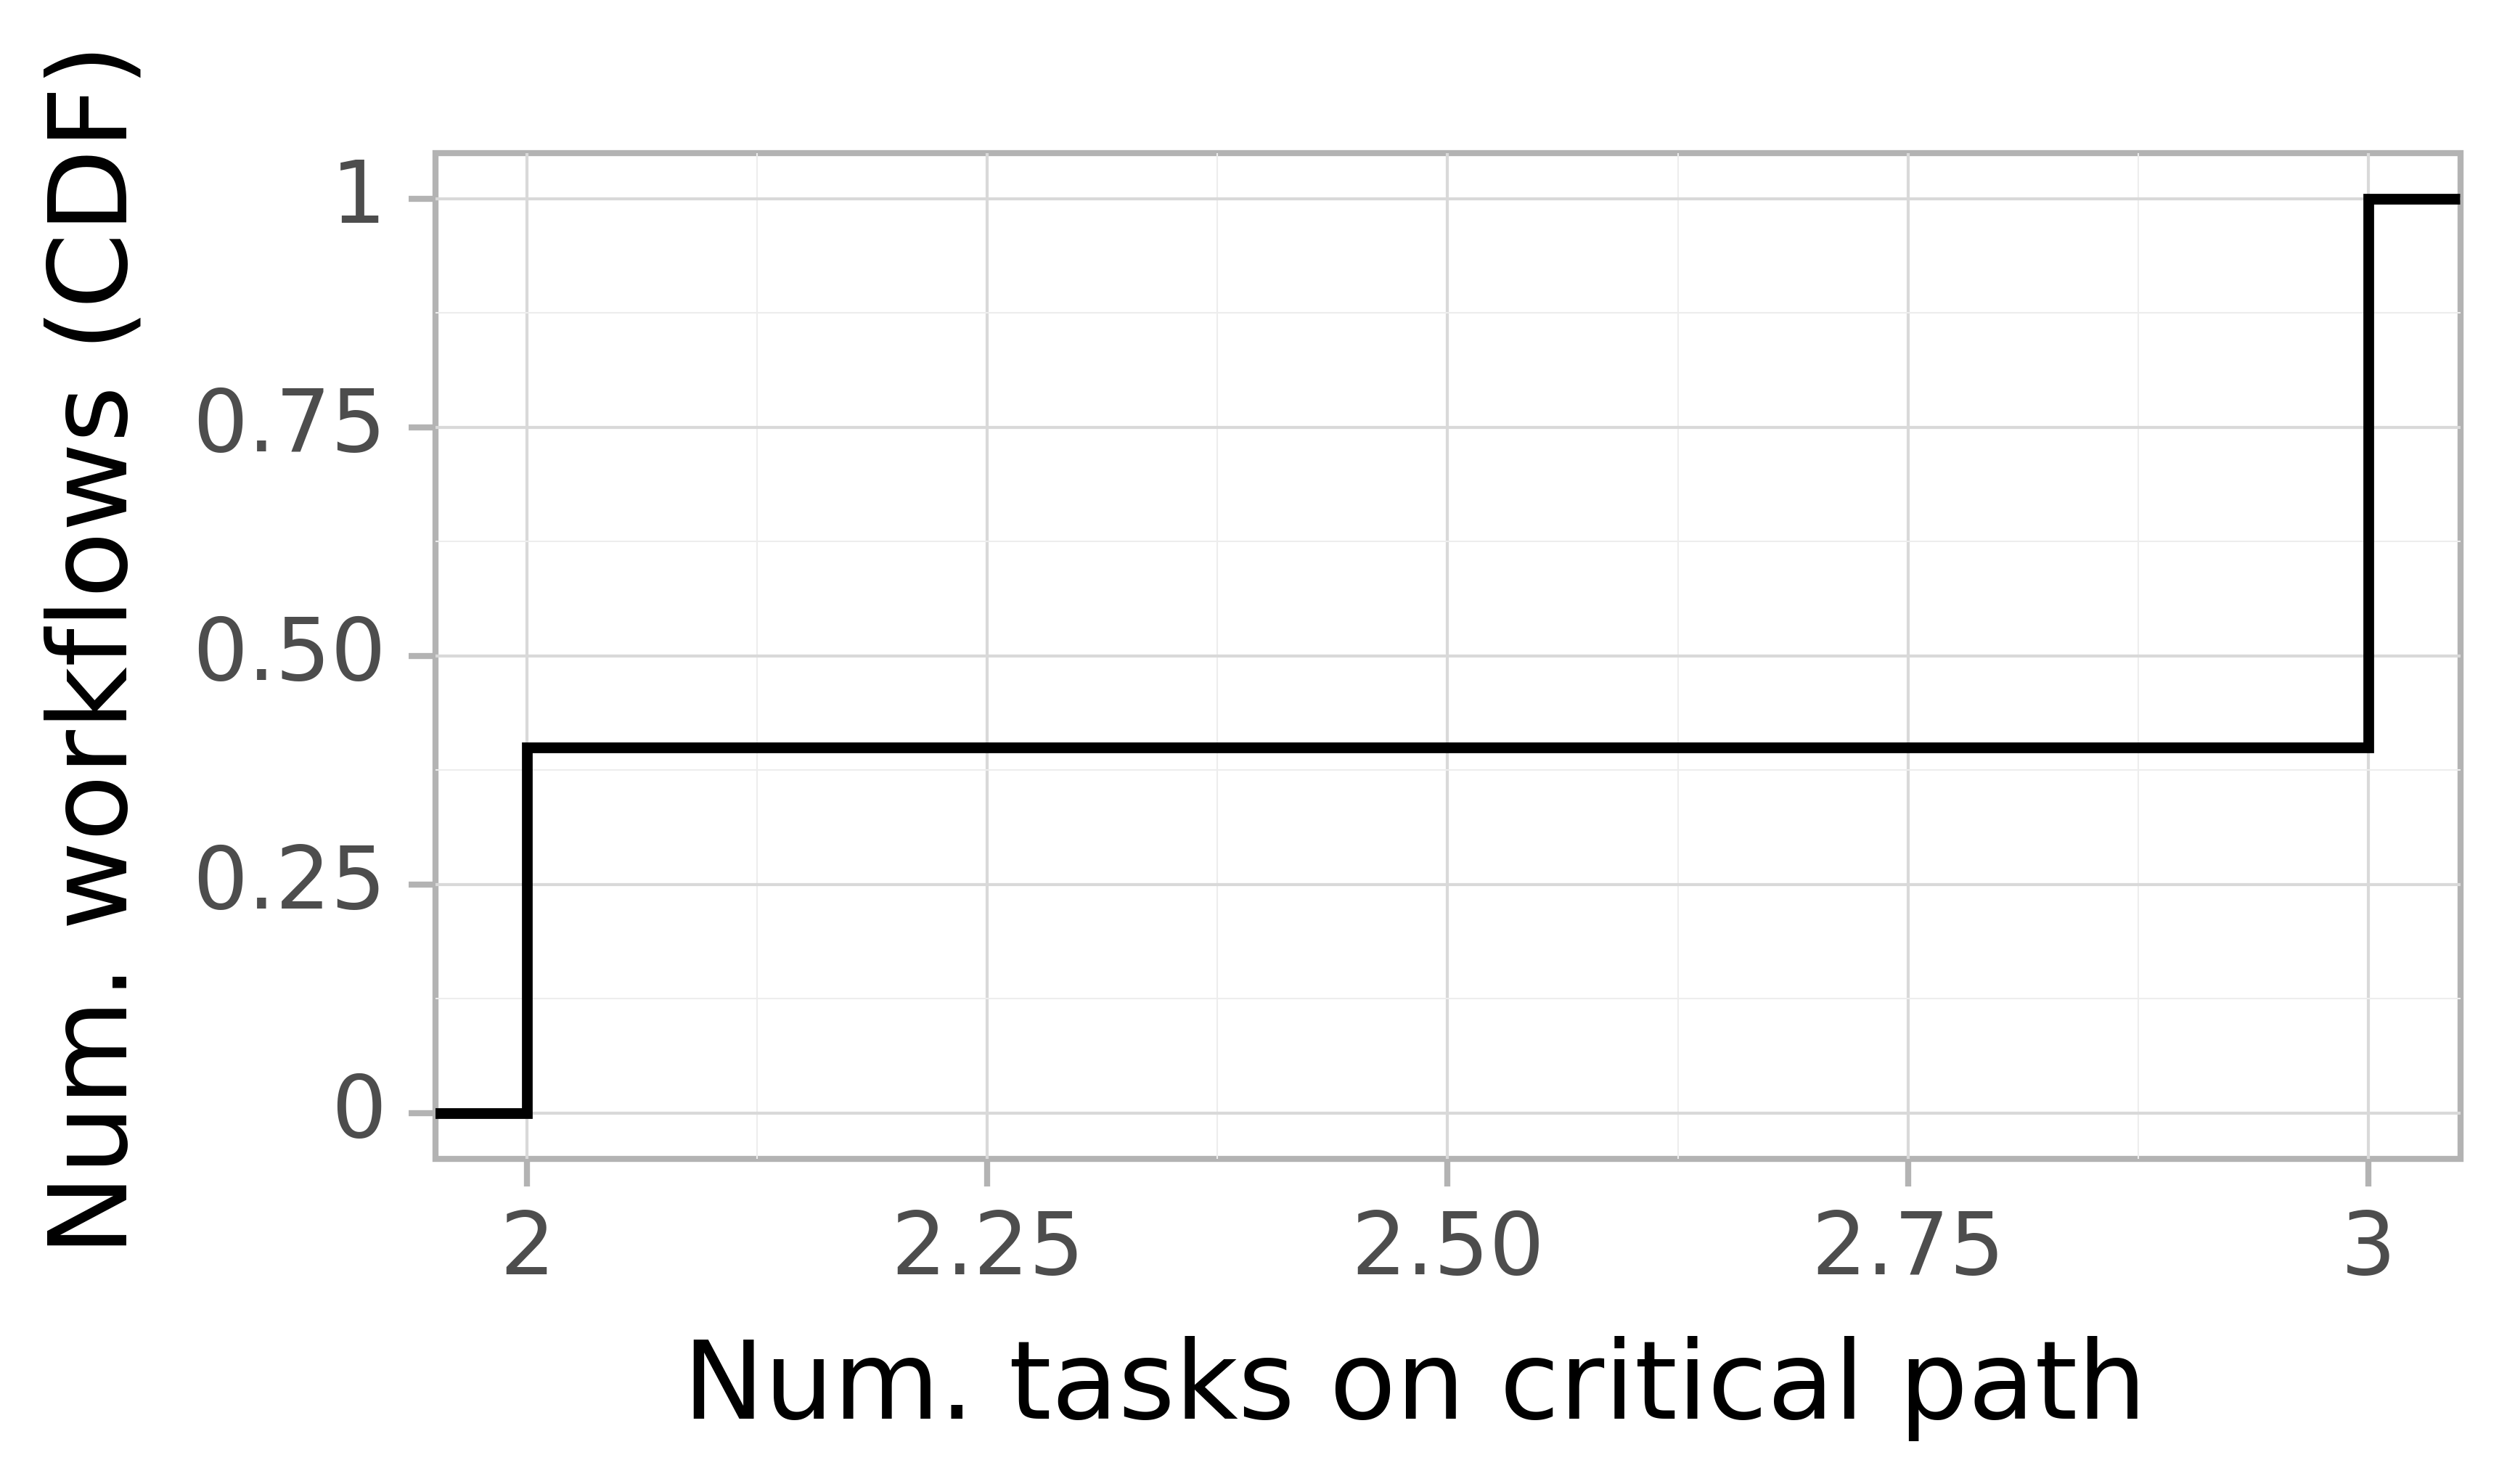 Job critical path task count graph for the shell trace.